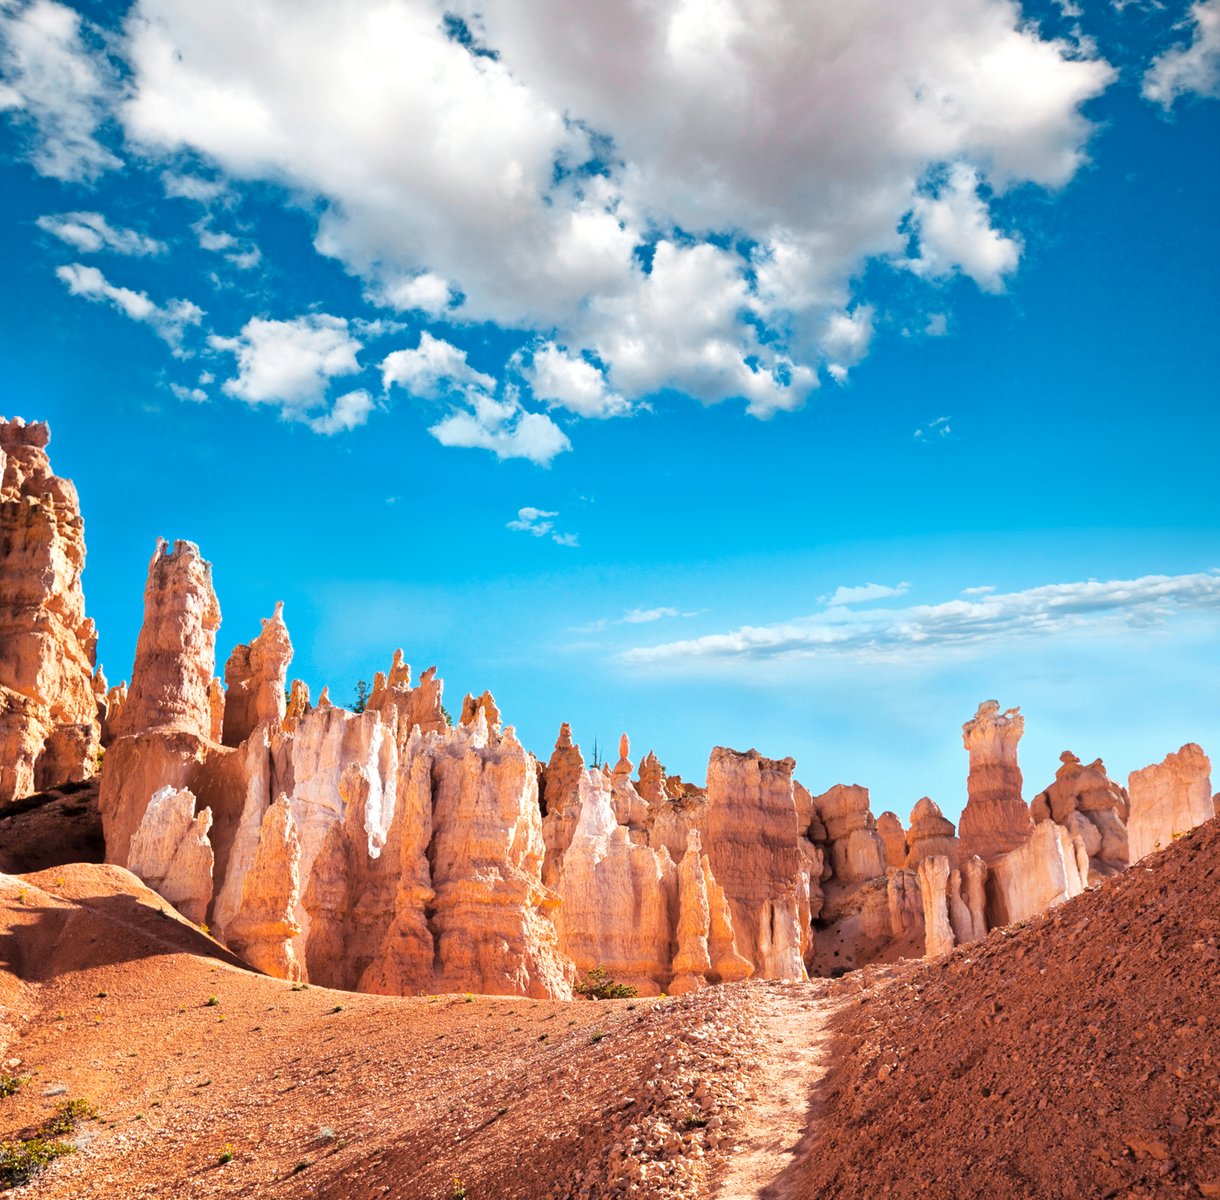 Passaggio A Sud Ovest - Bryce Canyon National Park